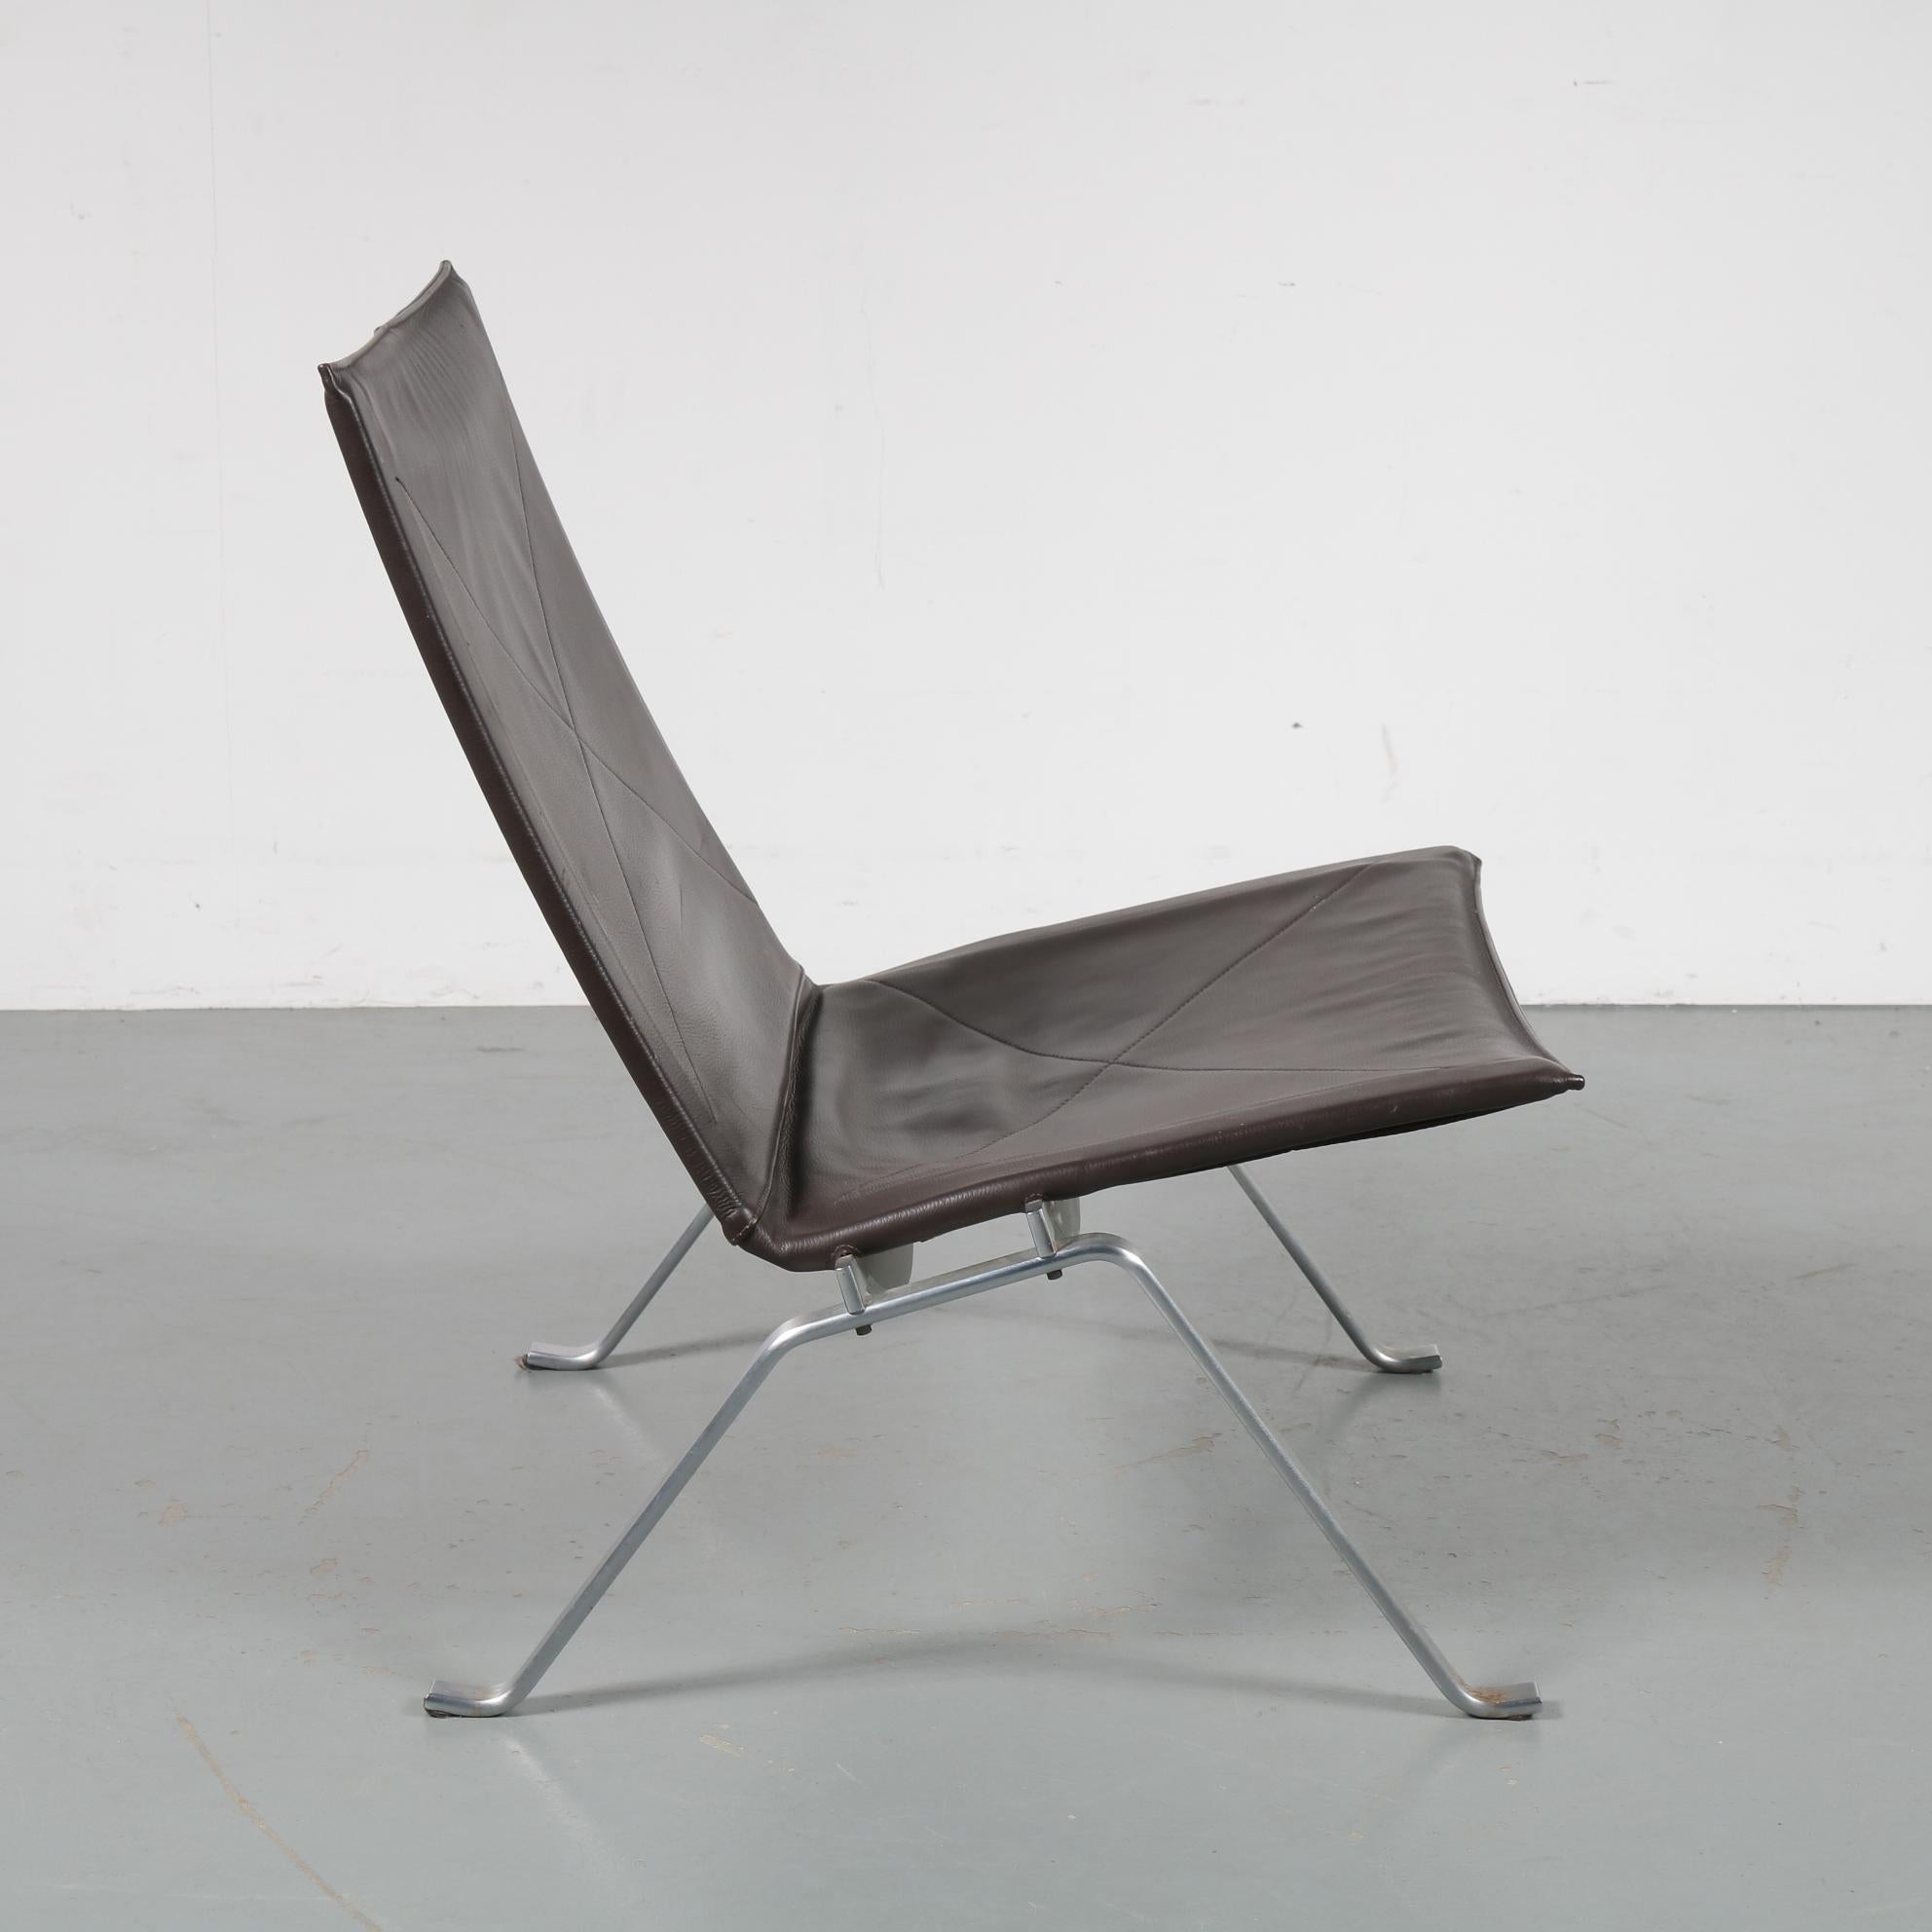 A stunning PK22 lounge chair, designed by Poul Kjaerholm, manufactured by E. Kold Christensen in Denmark around 1960.

The chair has a beautiful chrome-plated metal base. It is upholstered in high quality thick brown leather, all original. This